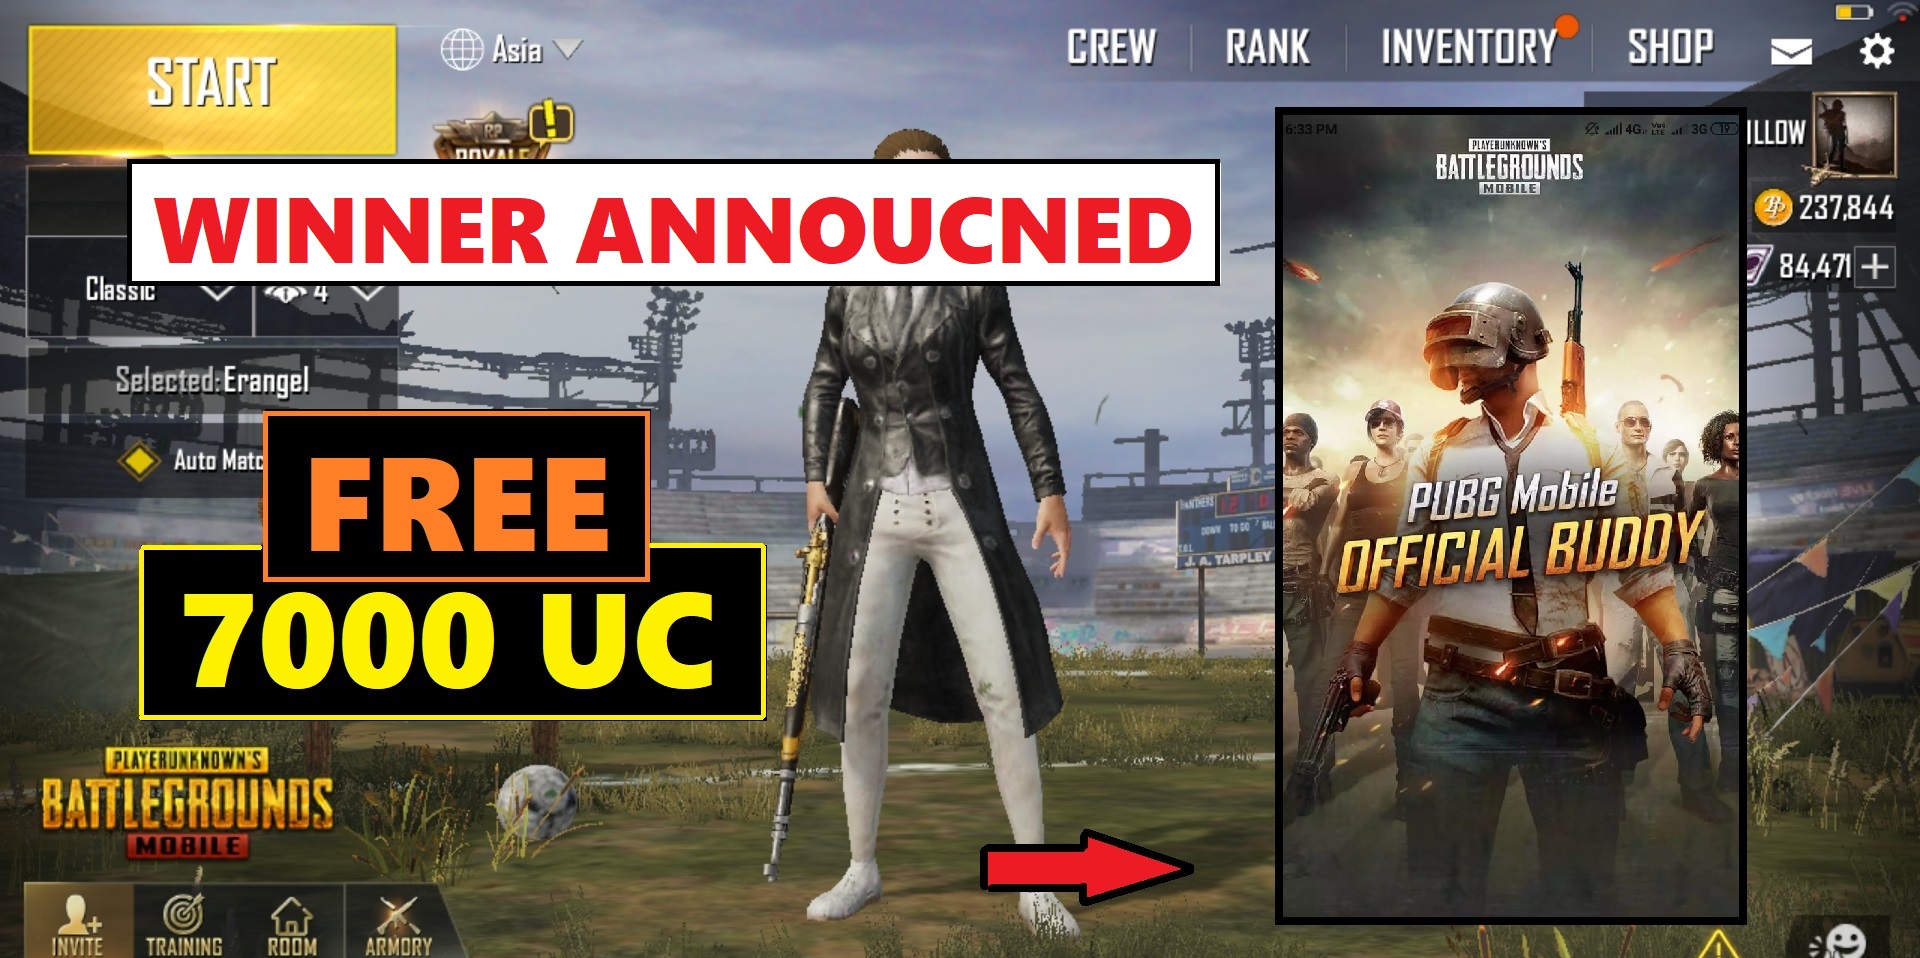 WeGame for PUBG Mobile app offers free in-game rewards once you...